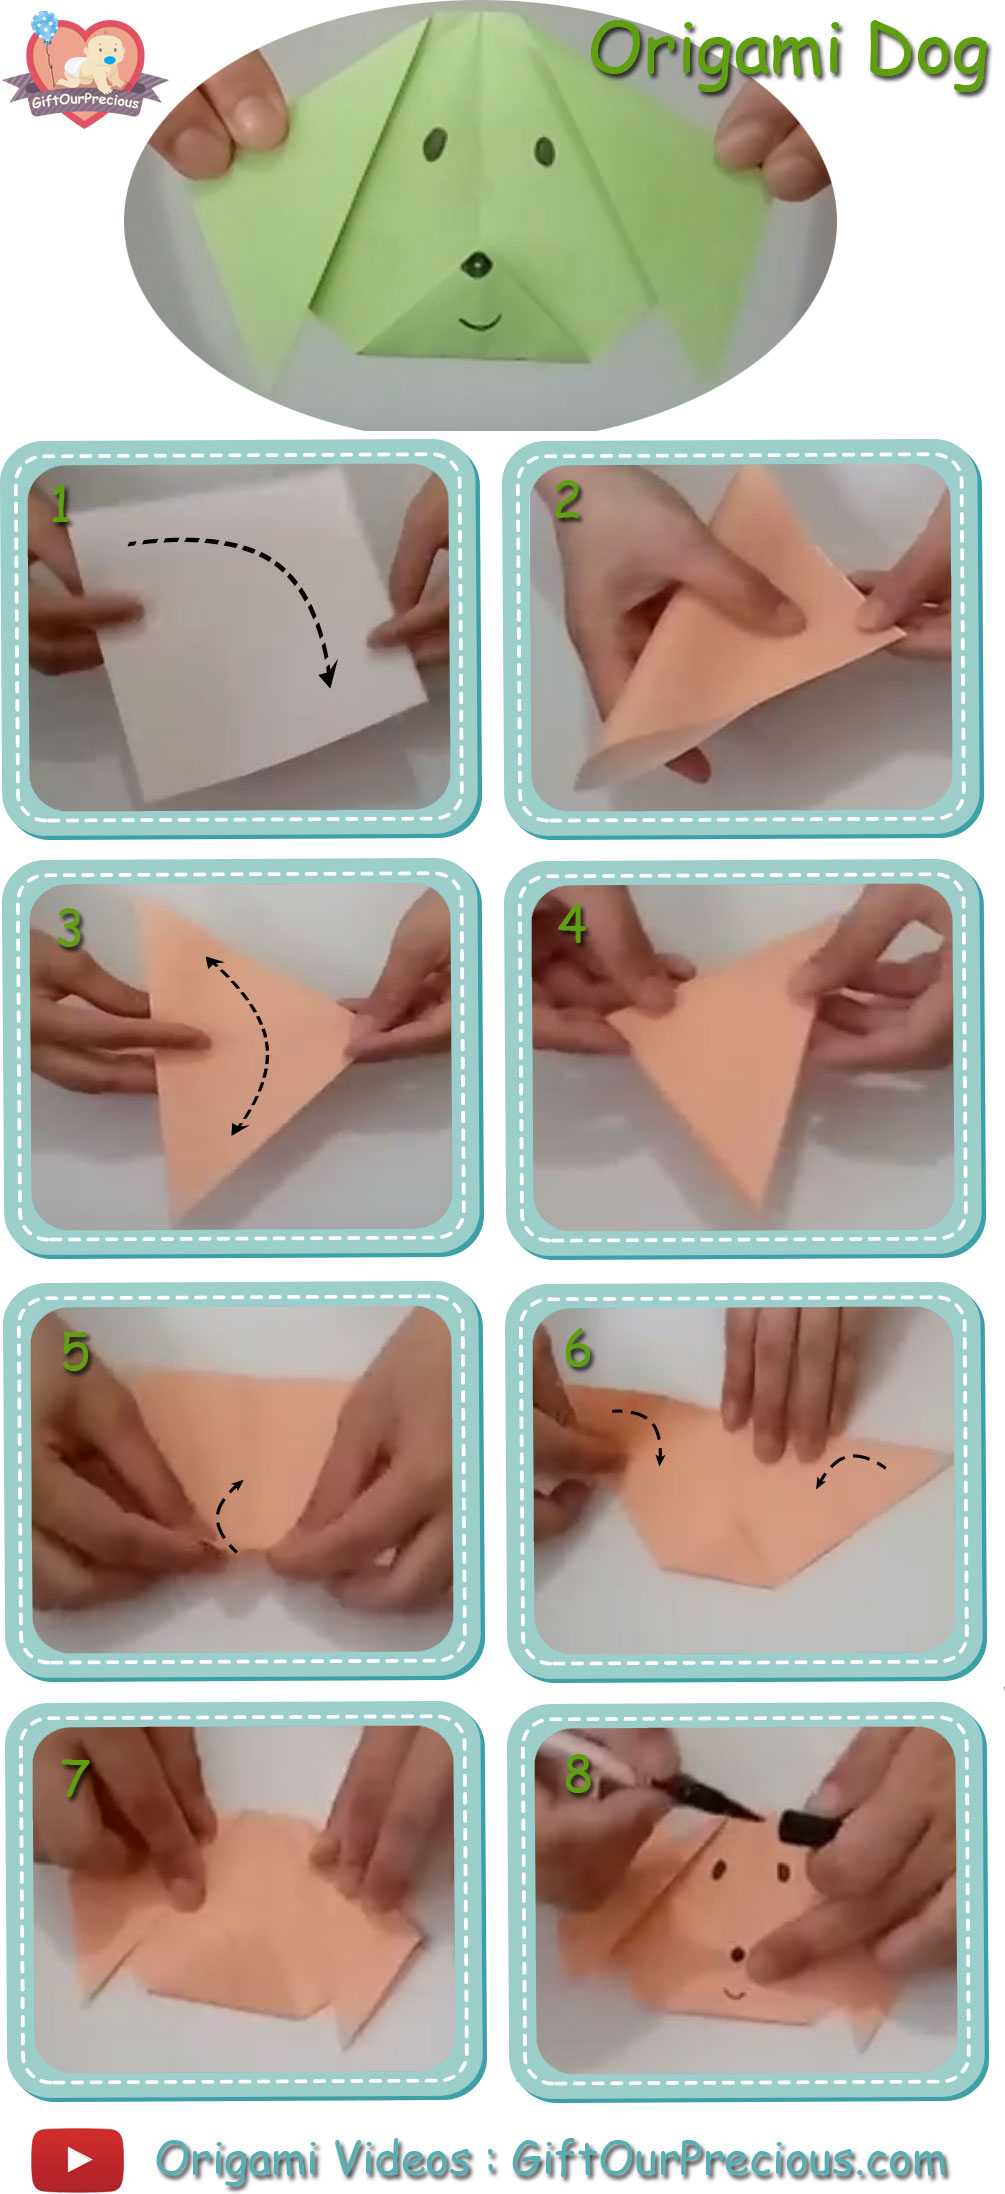 Fox Puppet Origami Easy Origami Dog Instructions For Kids Gift Our Precious